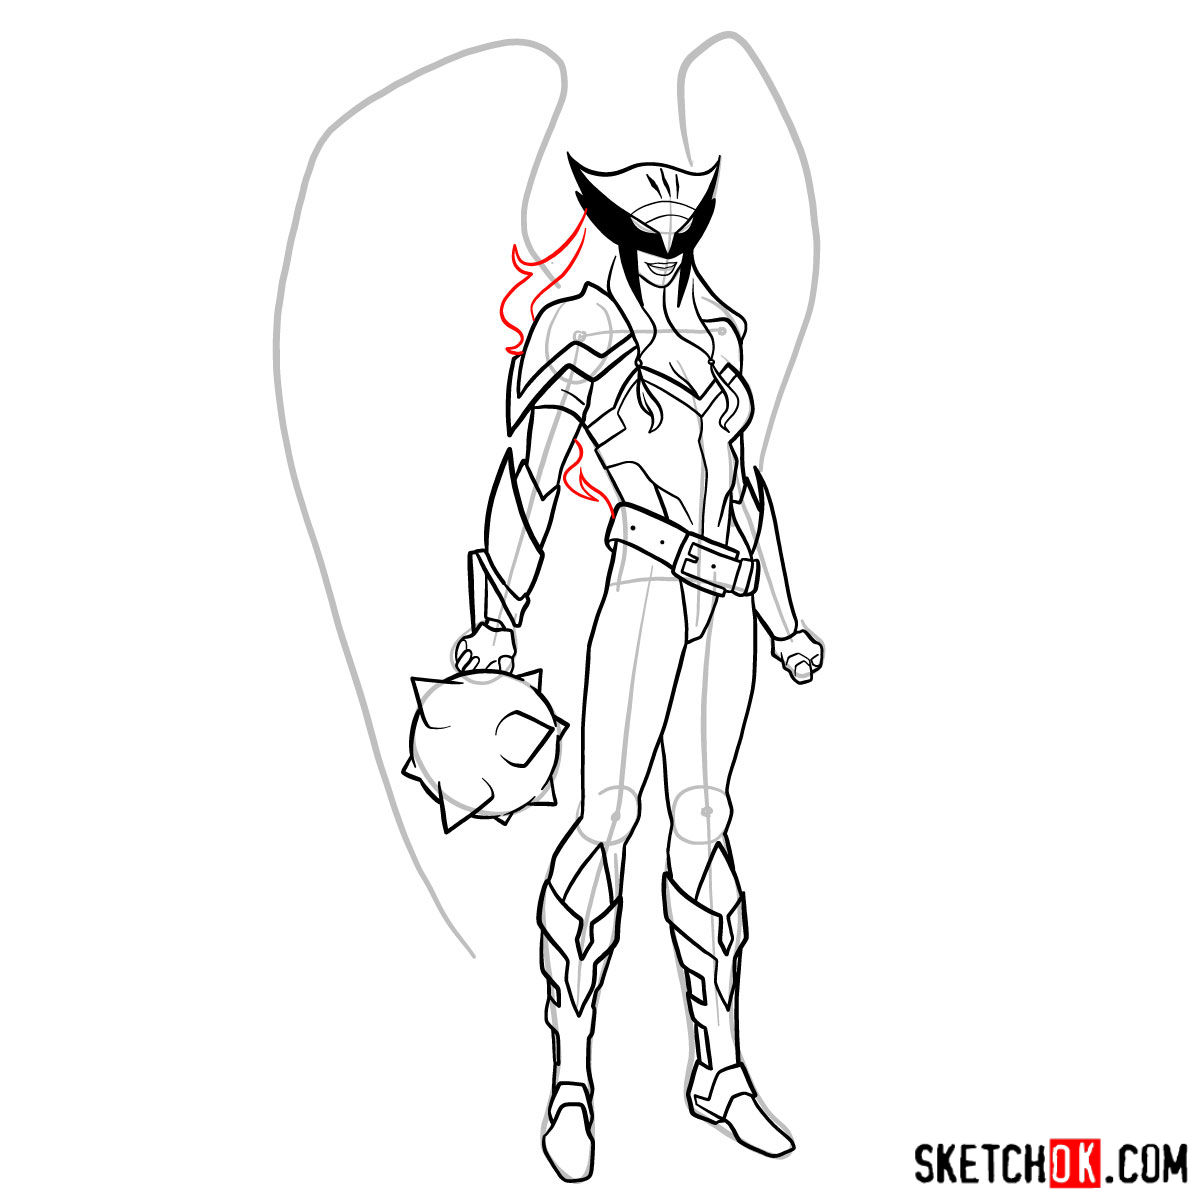 How to draw Hawkgirl DC superheroine - step 15